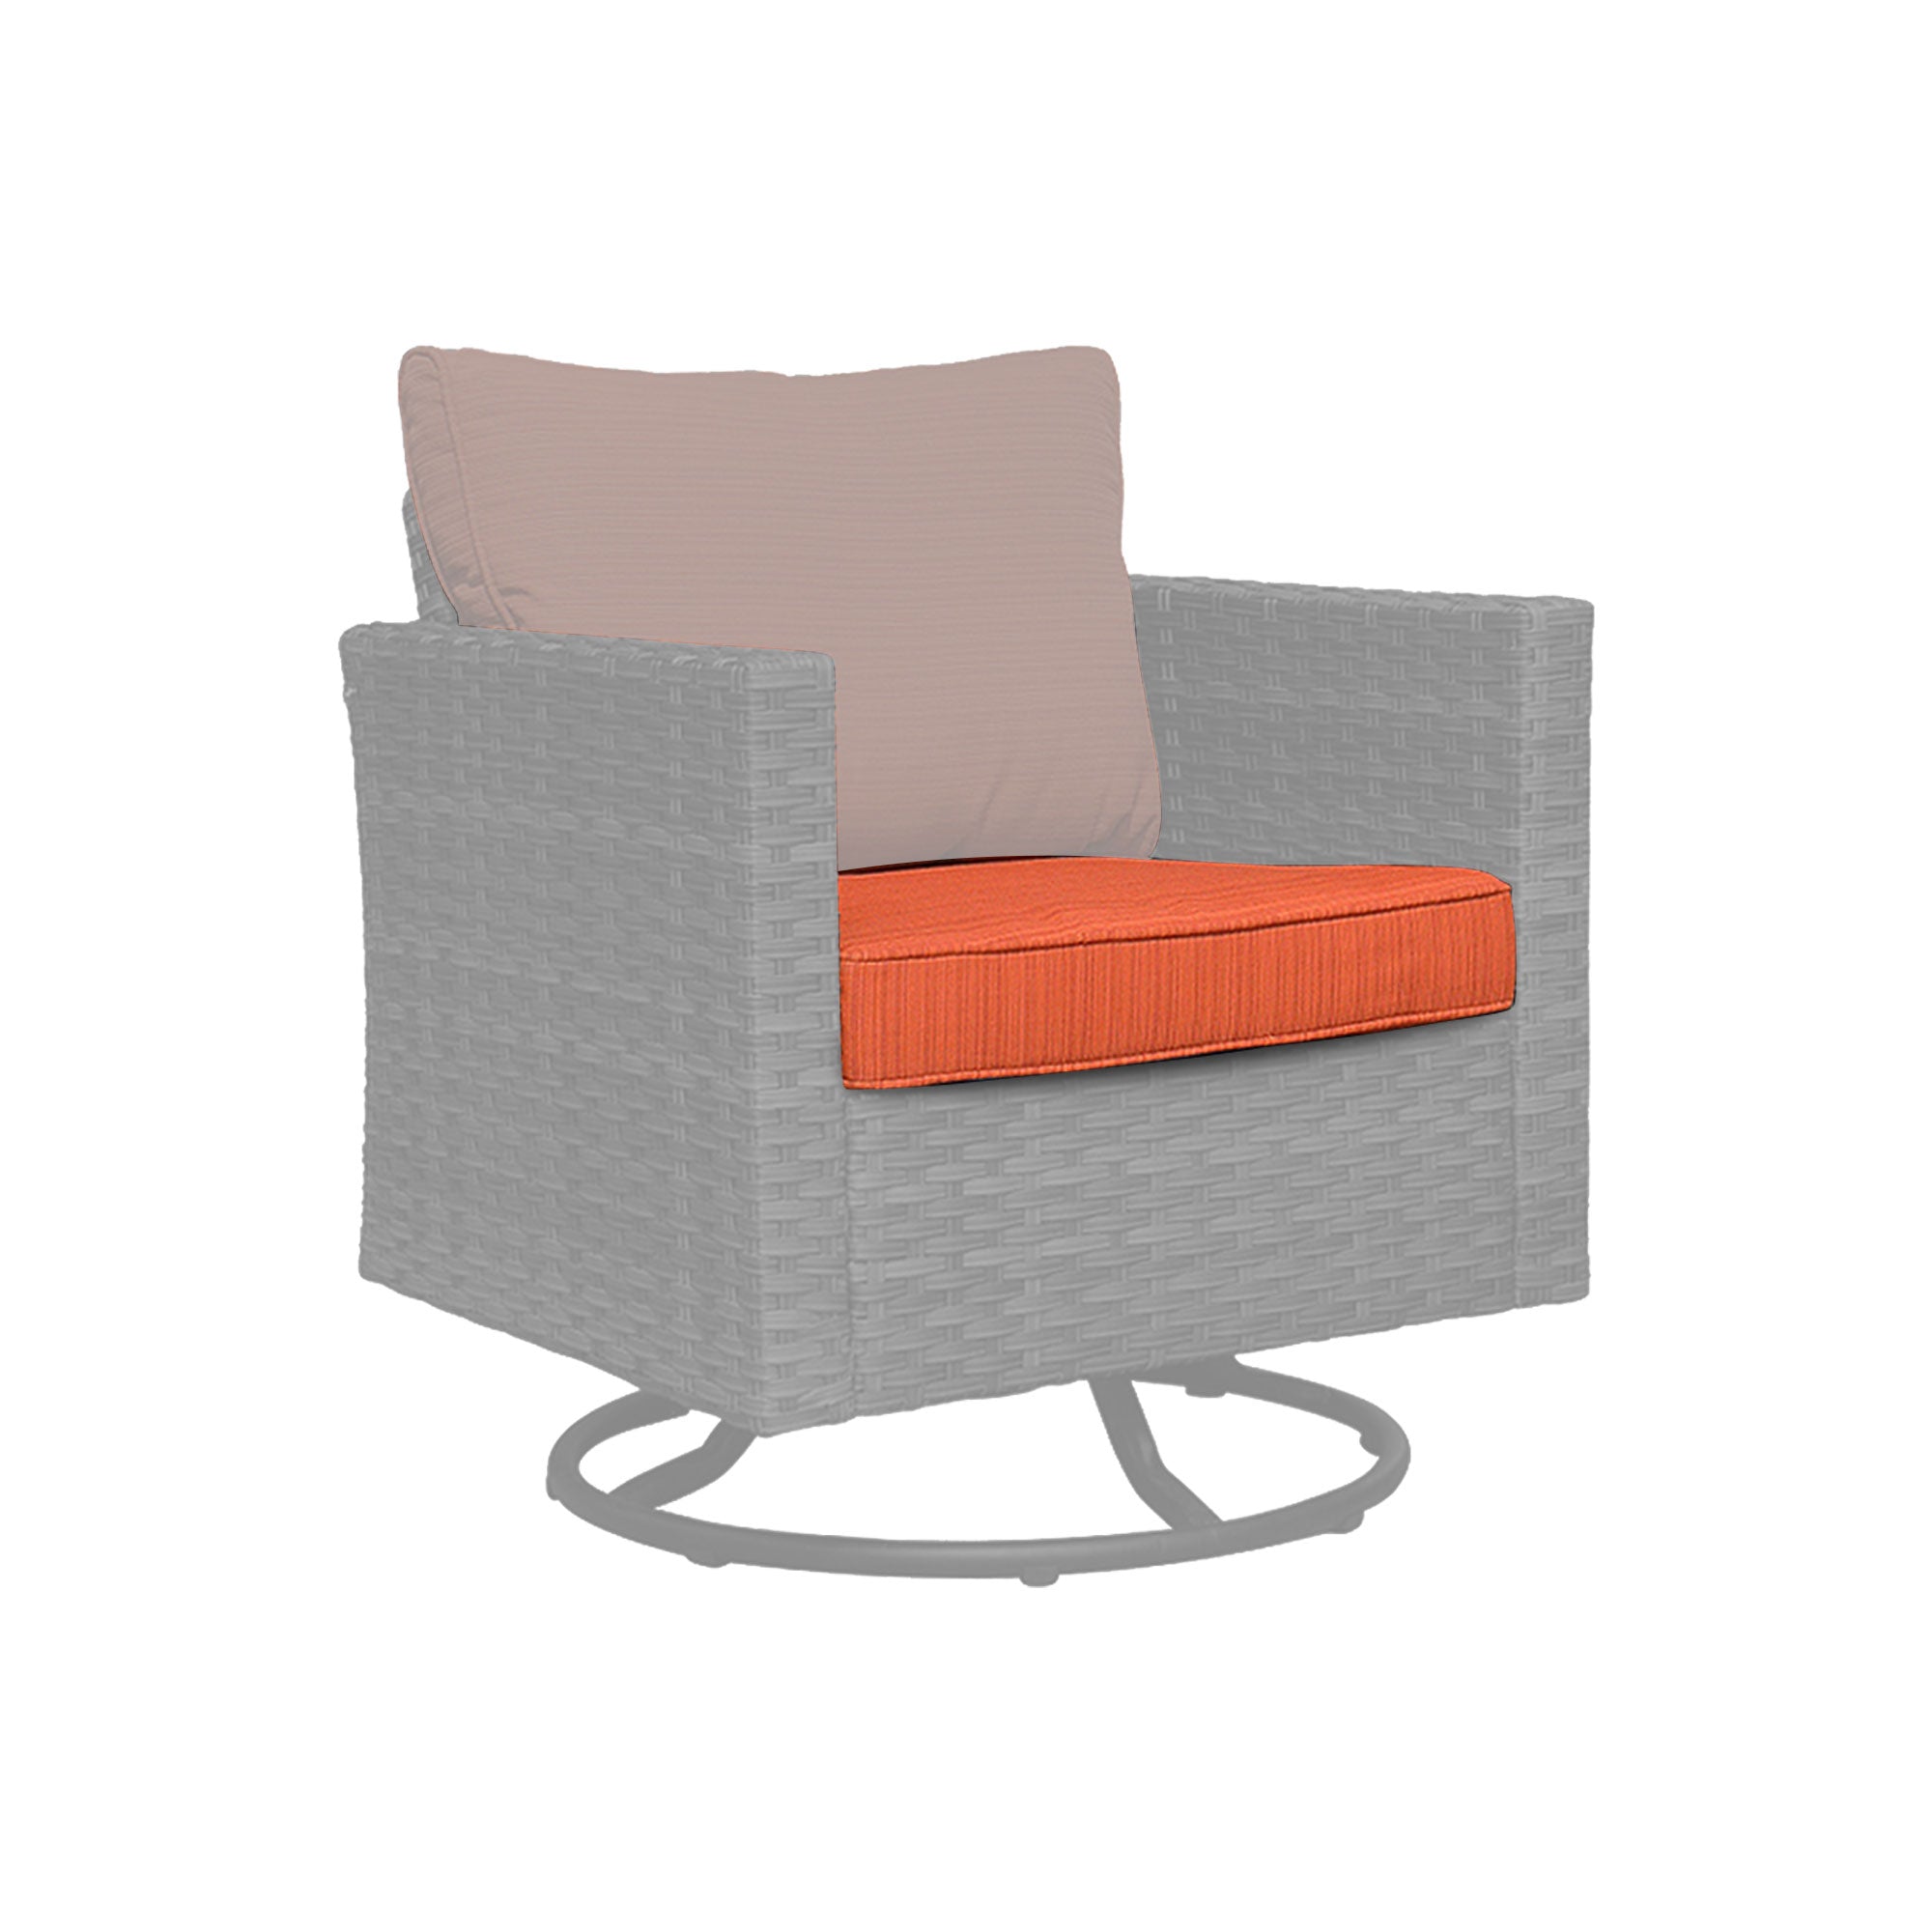 Ovios Vultros Series Replacement Seat, Back, Ottoman Cushion (Refer to the Dimension in Description)